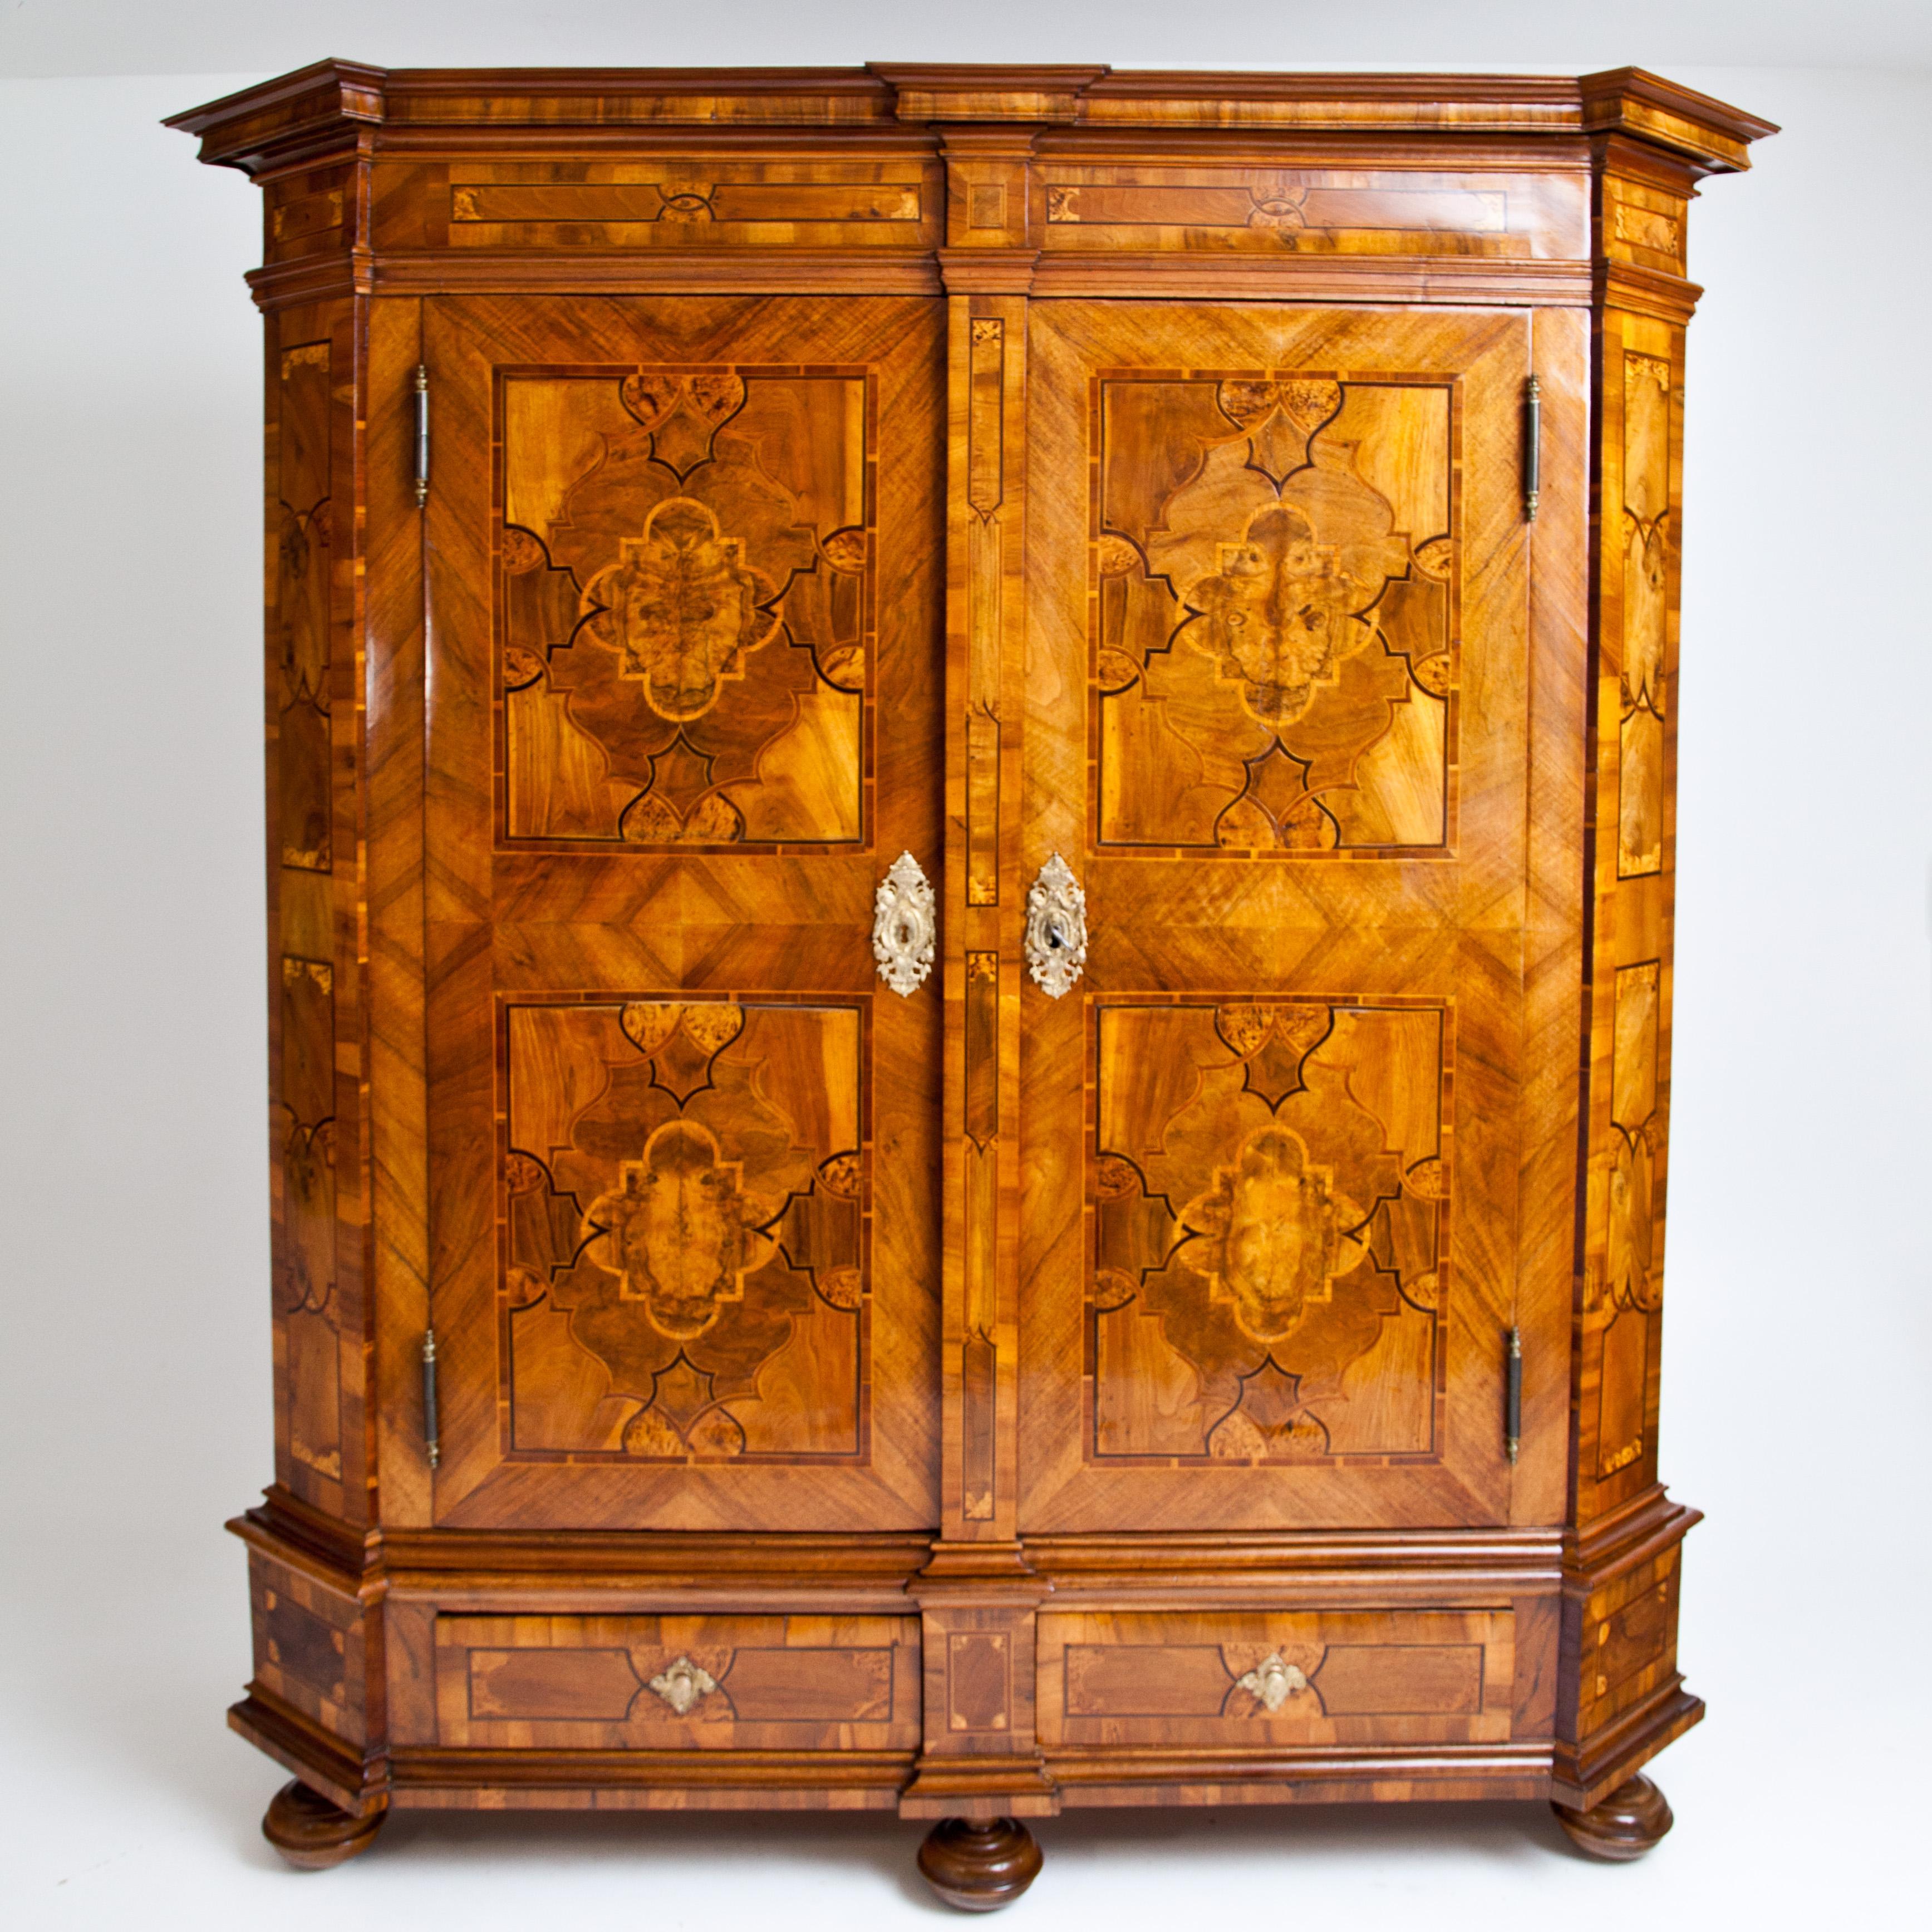 Two-door baroque cabinet on profiled bun feet with bevelled corners and pilasters. In the base are two drawers with brass pull handles, between two profiled strips. The flat cornice is also slightly cranked and set off by profiled strips. The doors